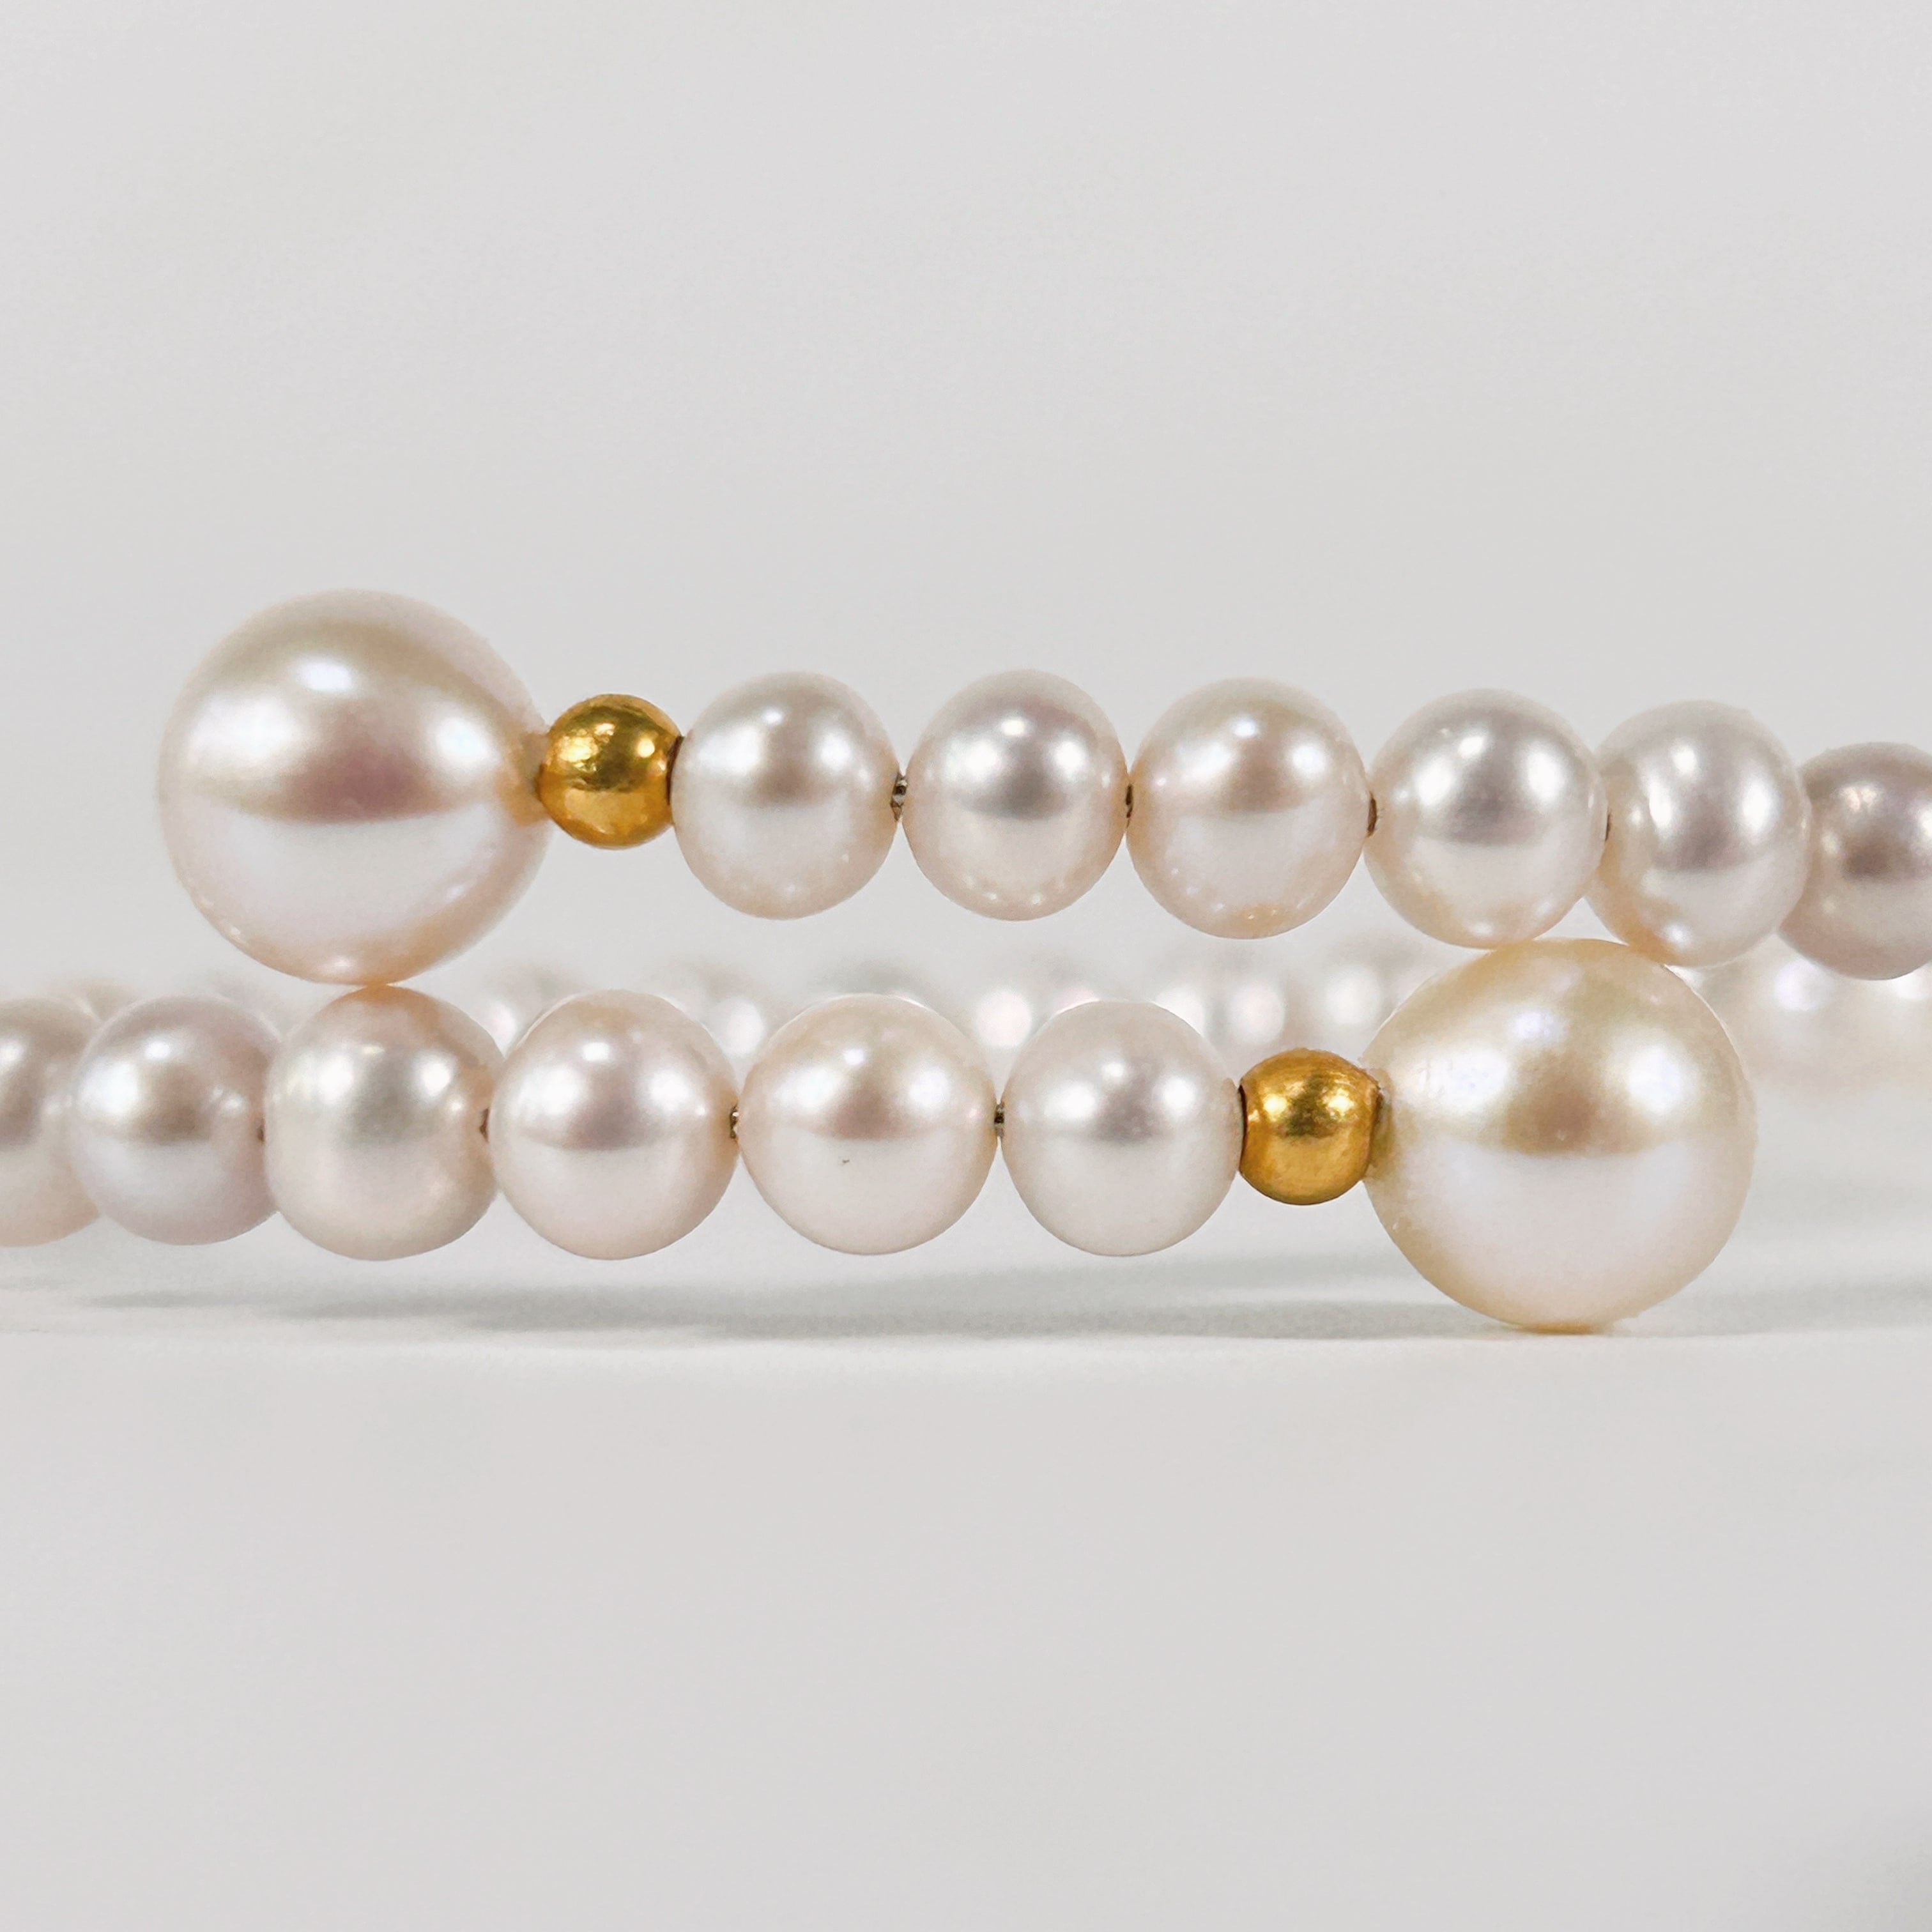 Sound of Pearls London - Gifts from the Nature – soundofpearlslondon